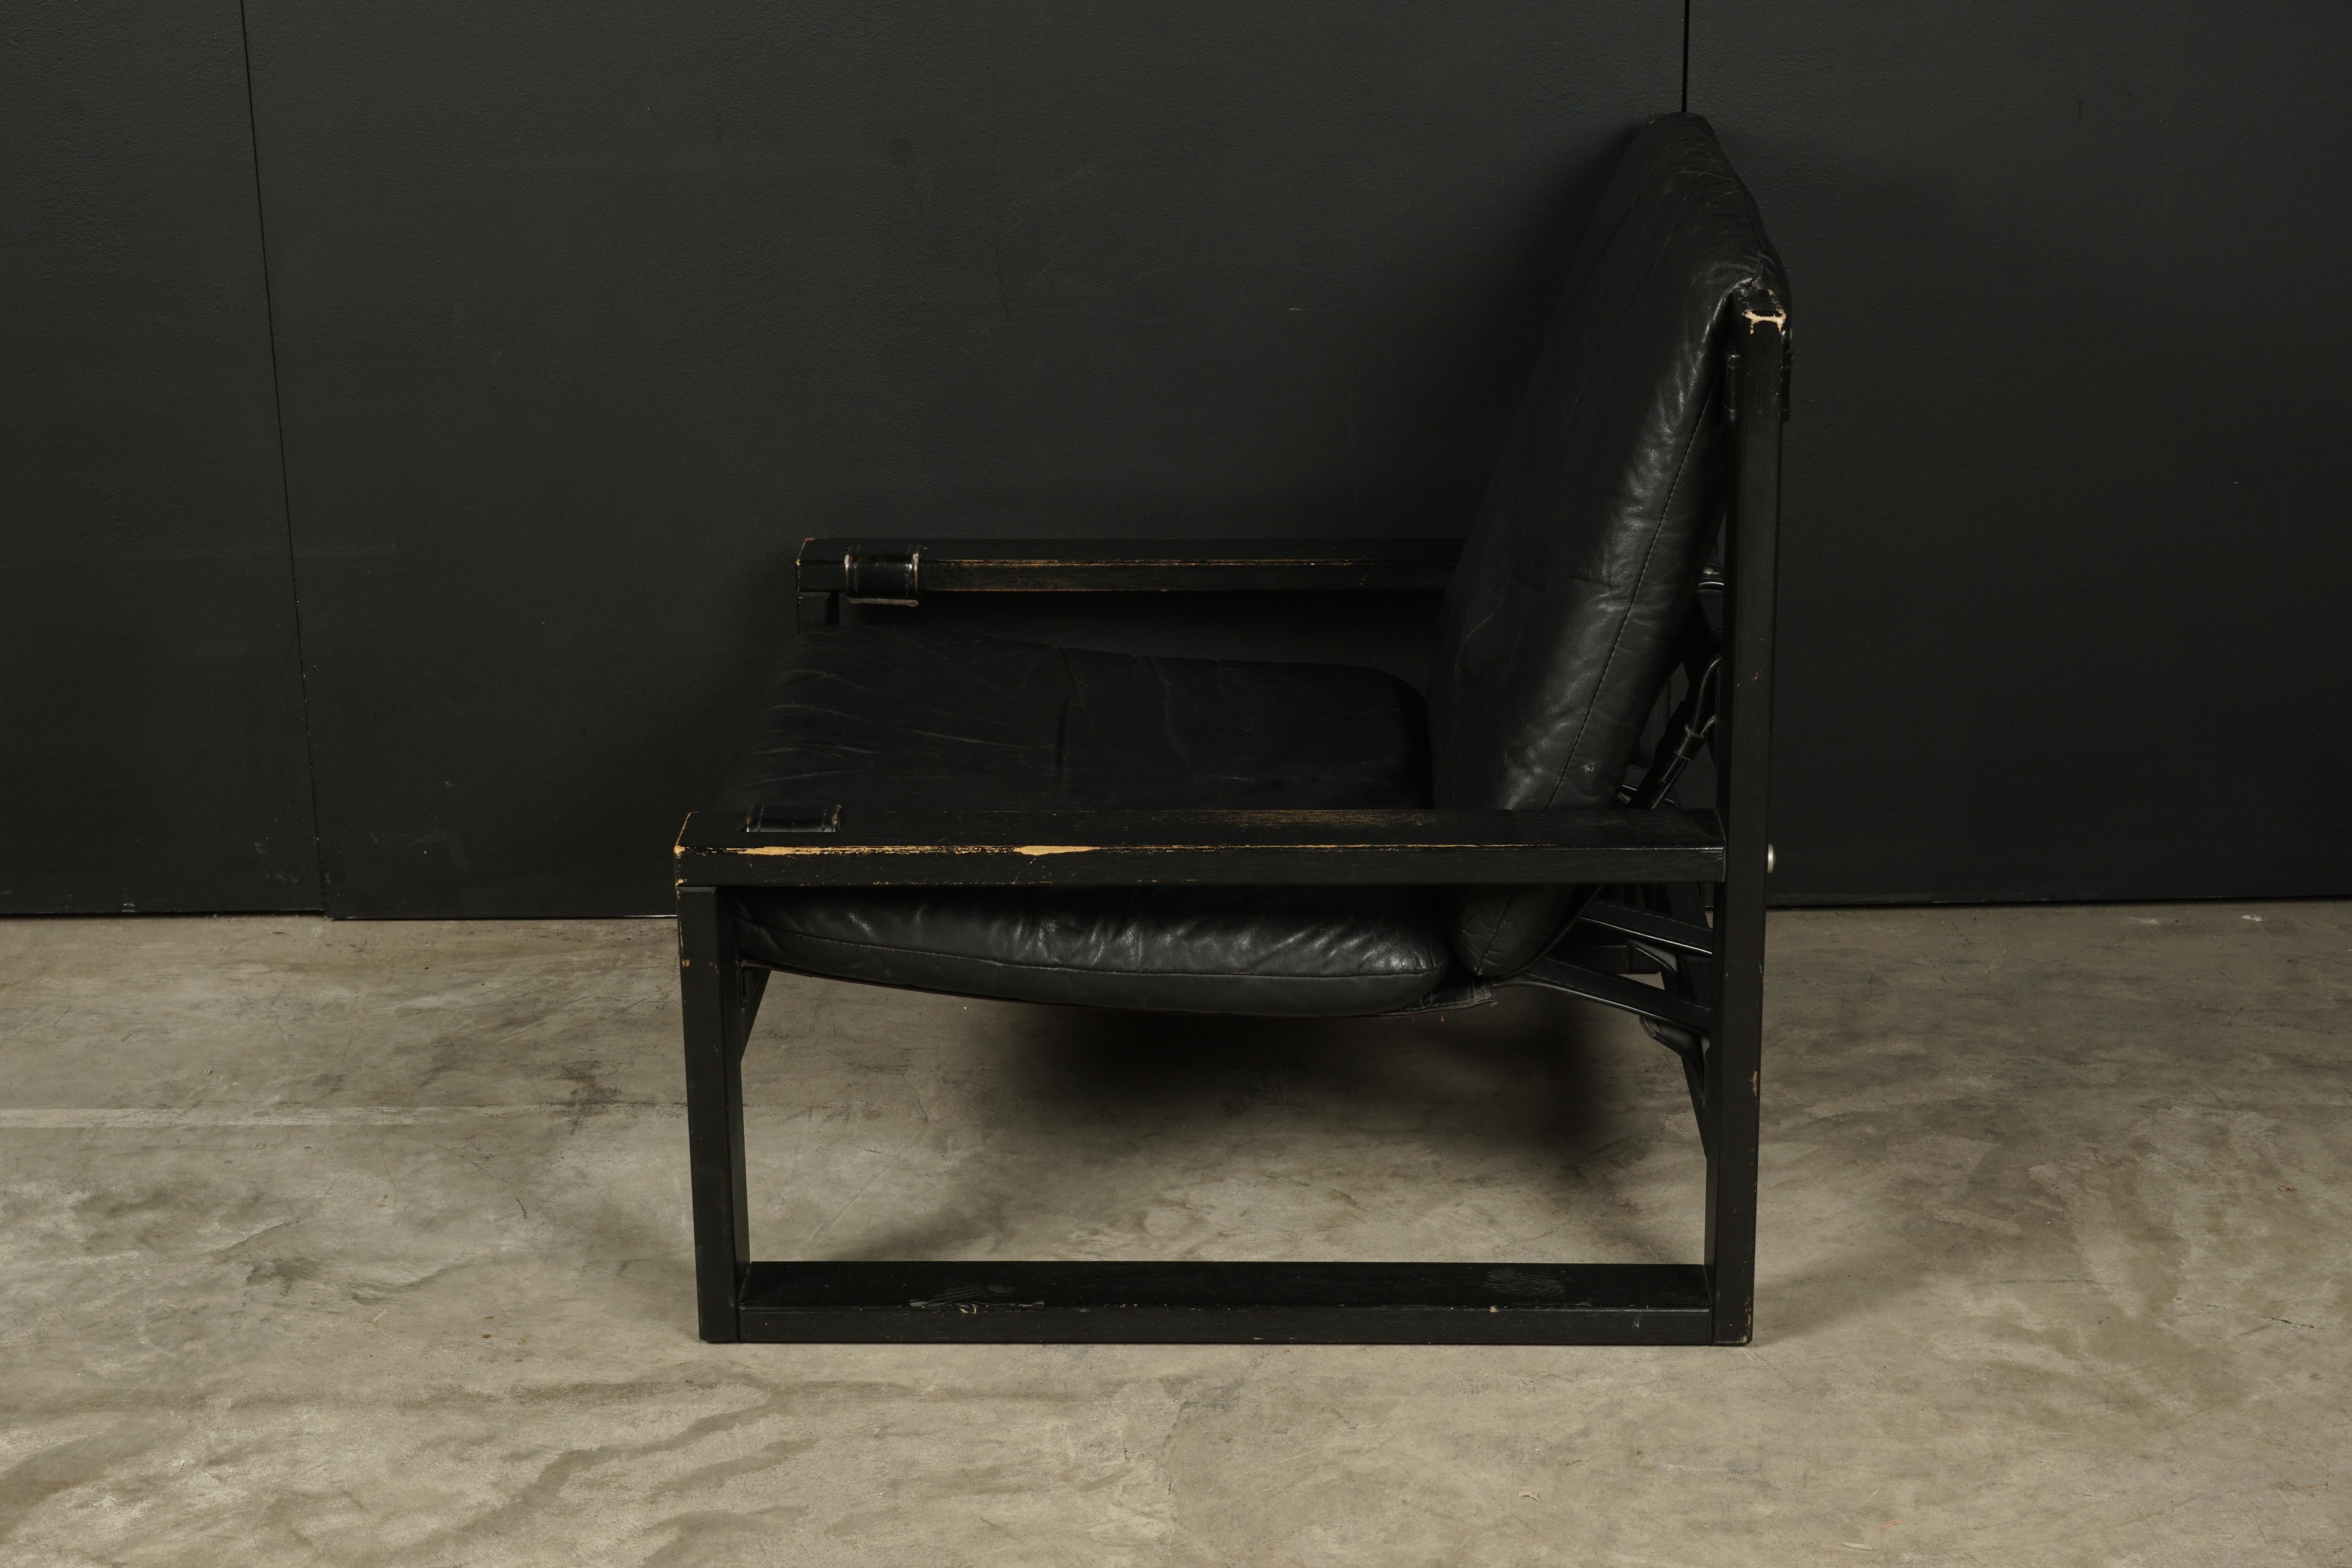 Vintage leather chair designed by Sonja Wasseur, Netherlands, 1970s. Black lacquered wooden frames with original black leather cushions.